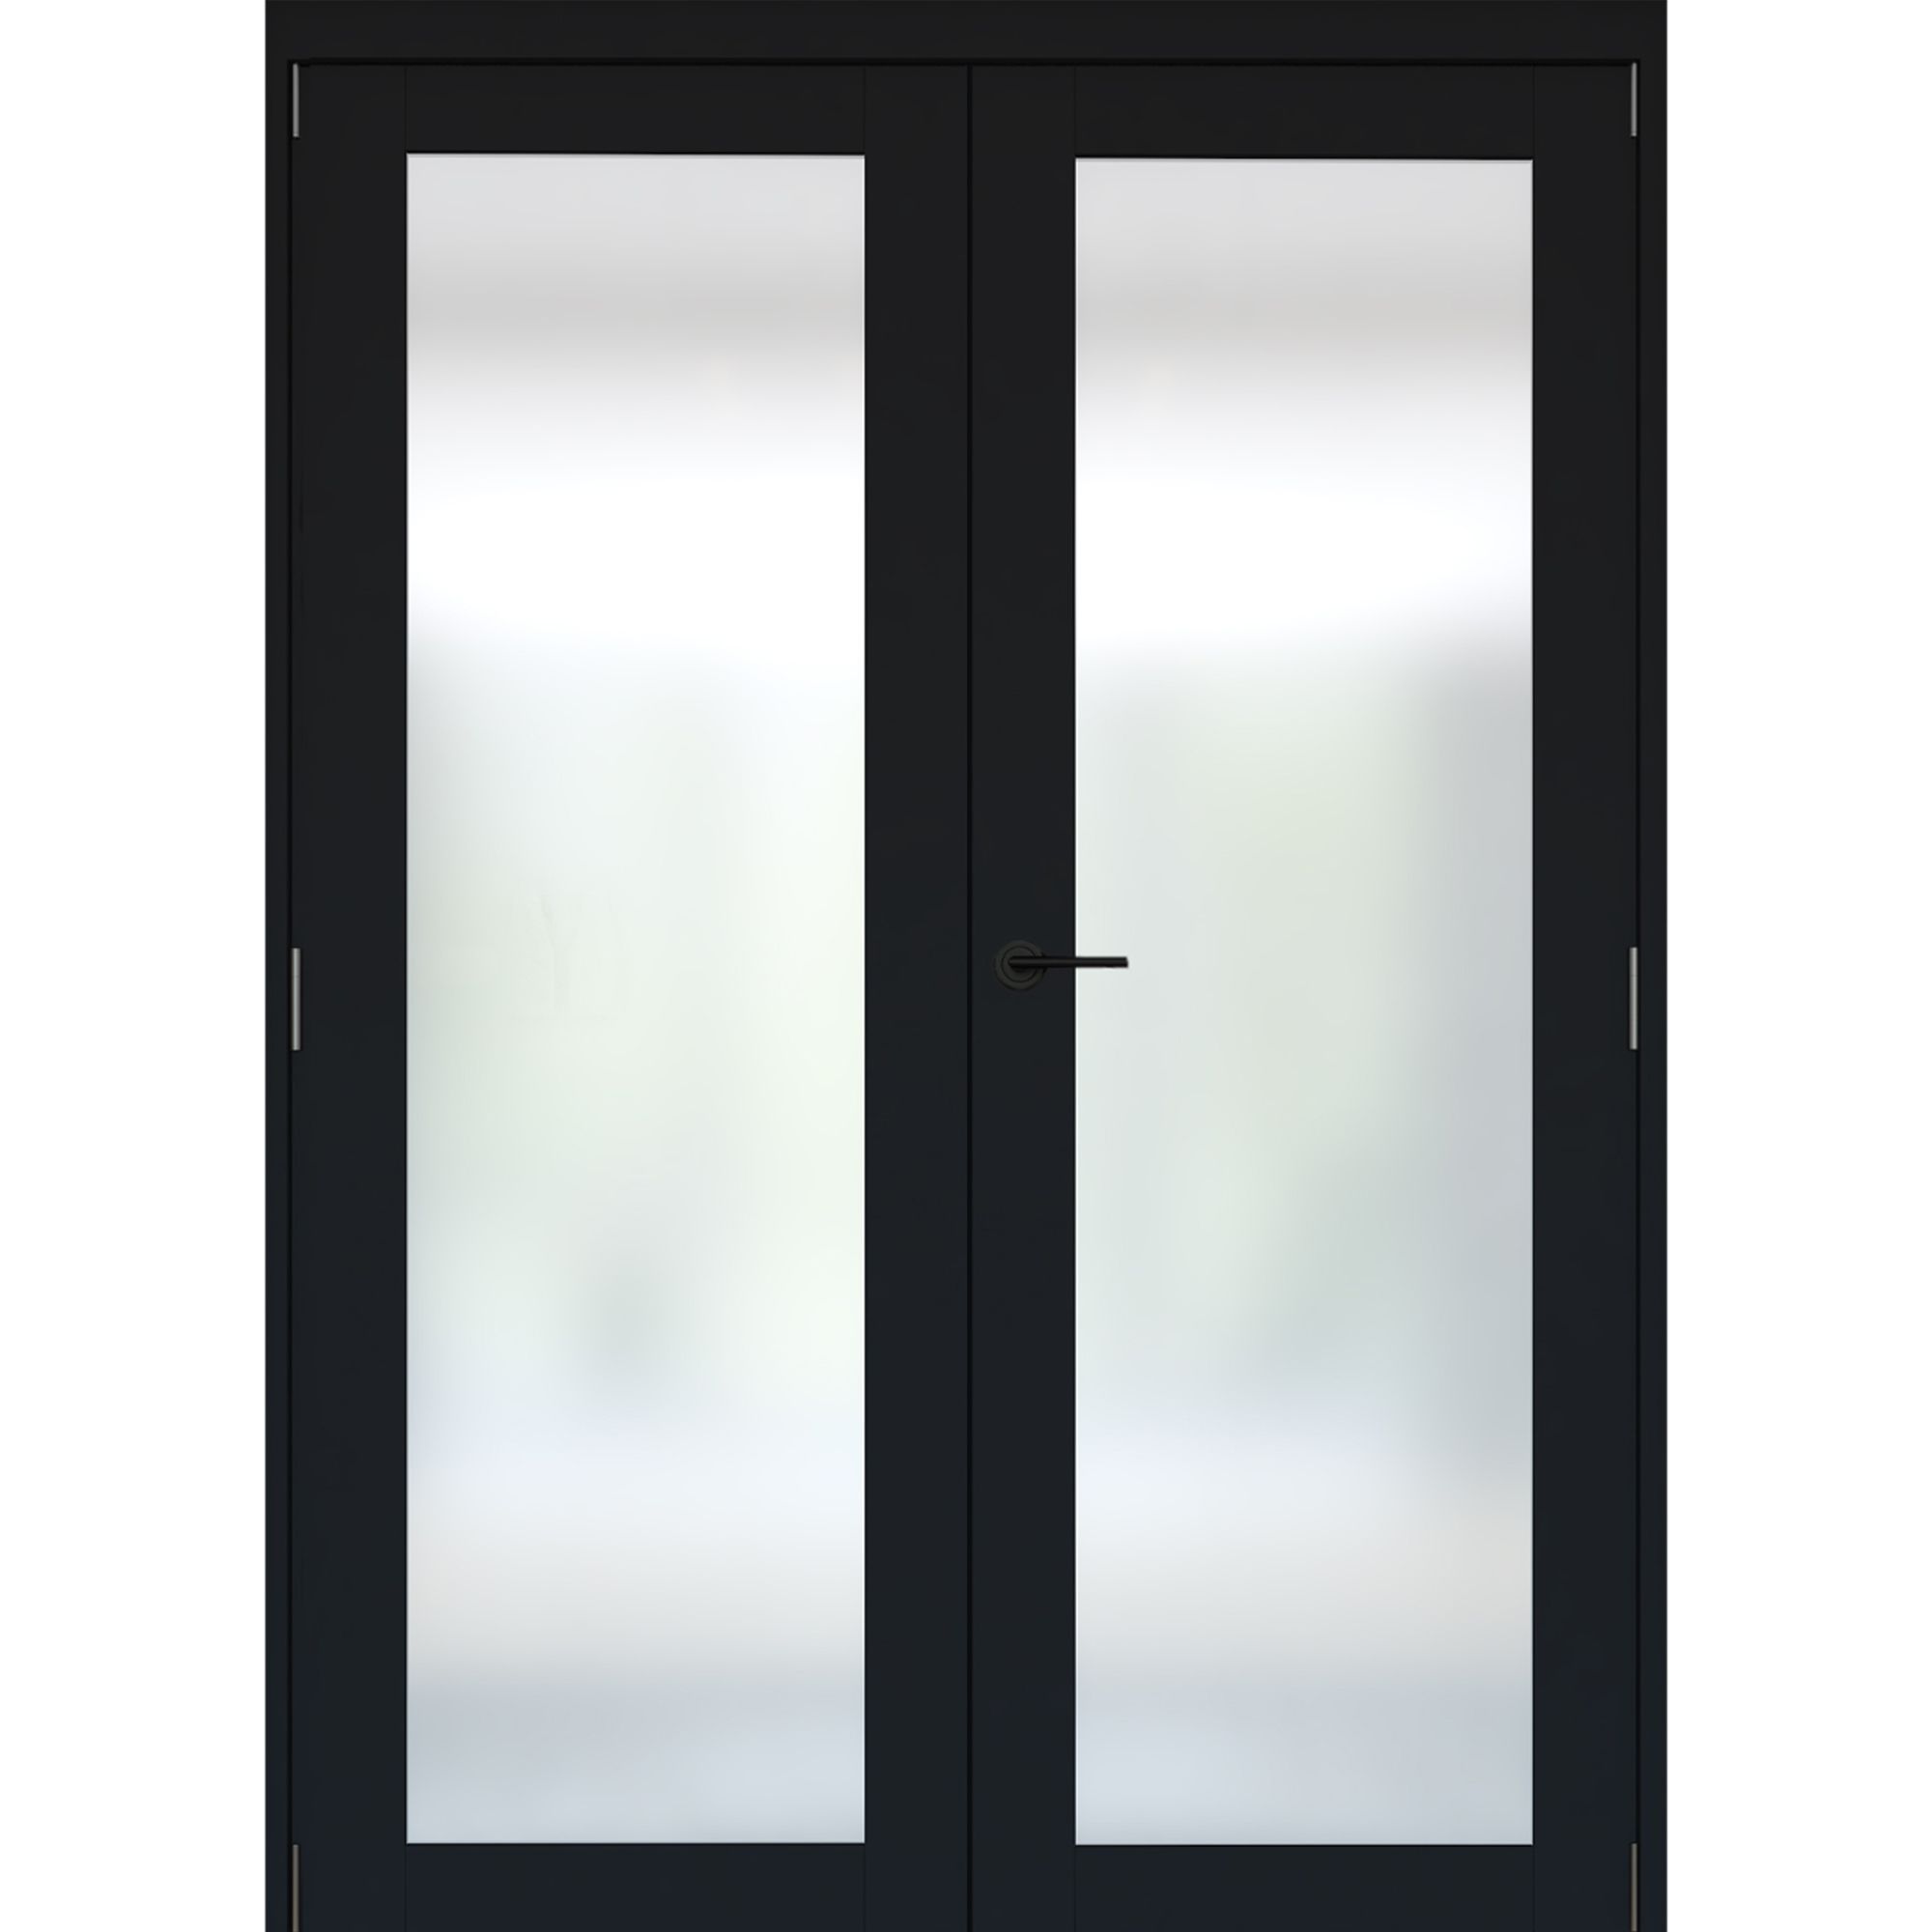 1 panel 1 Lite Frosted Fully glazed Timber Black Internal French door set 2017mm x 133mm x 1445mm - Fully Finished